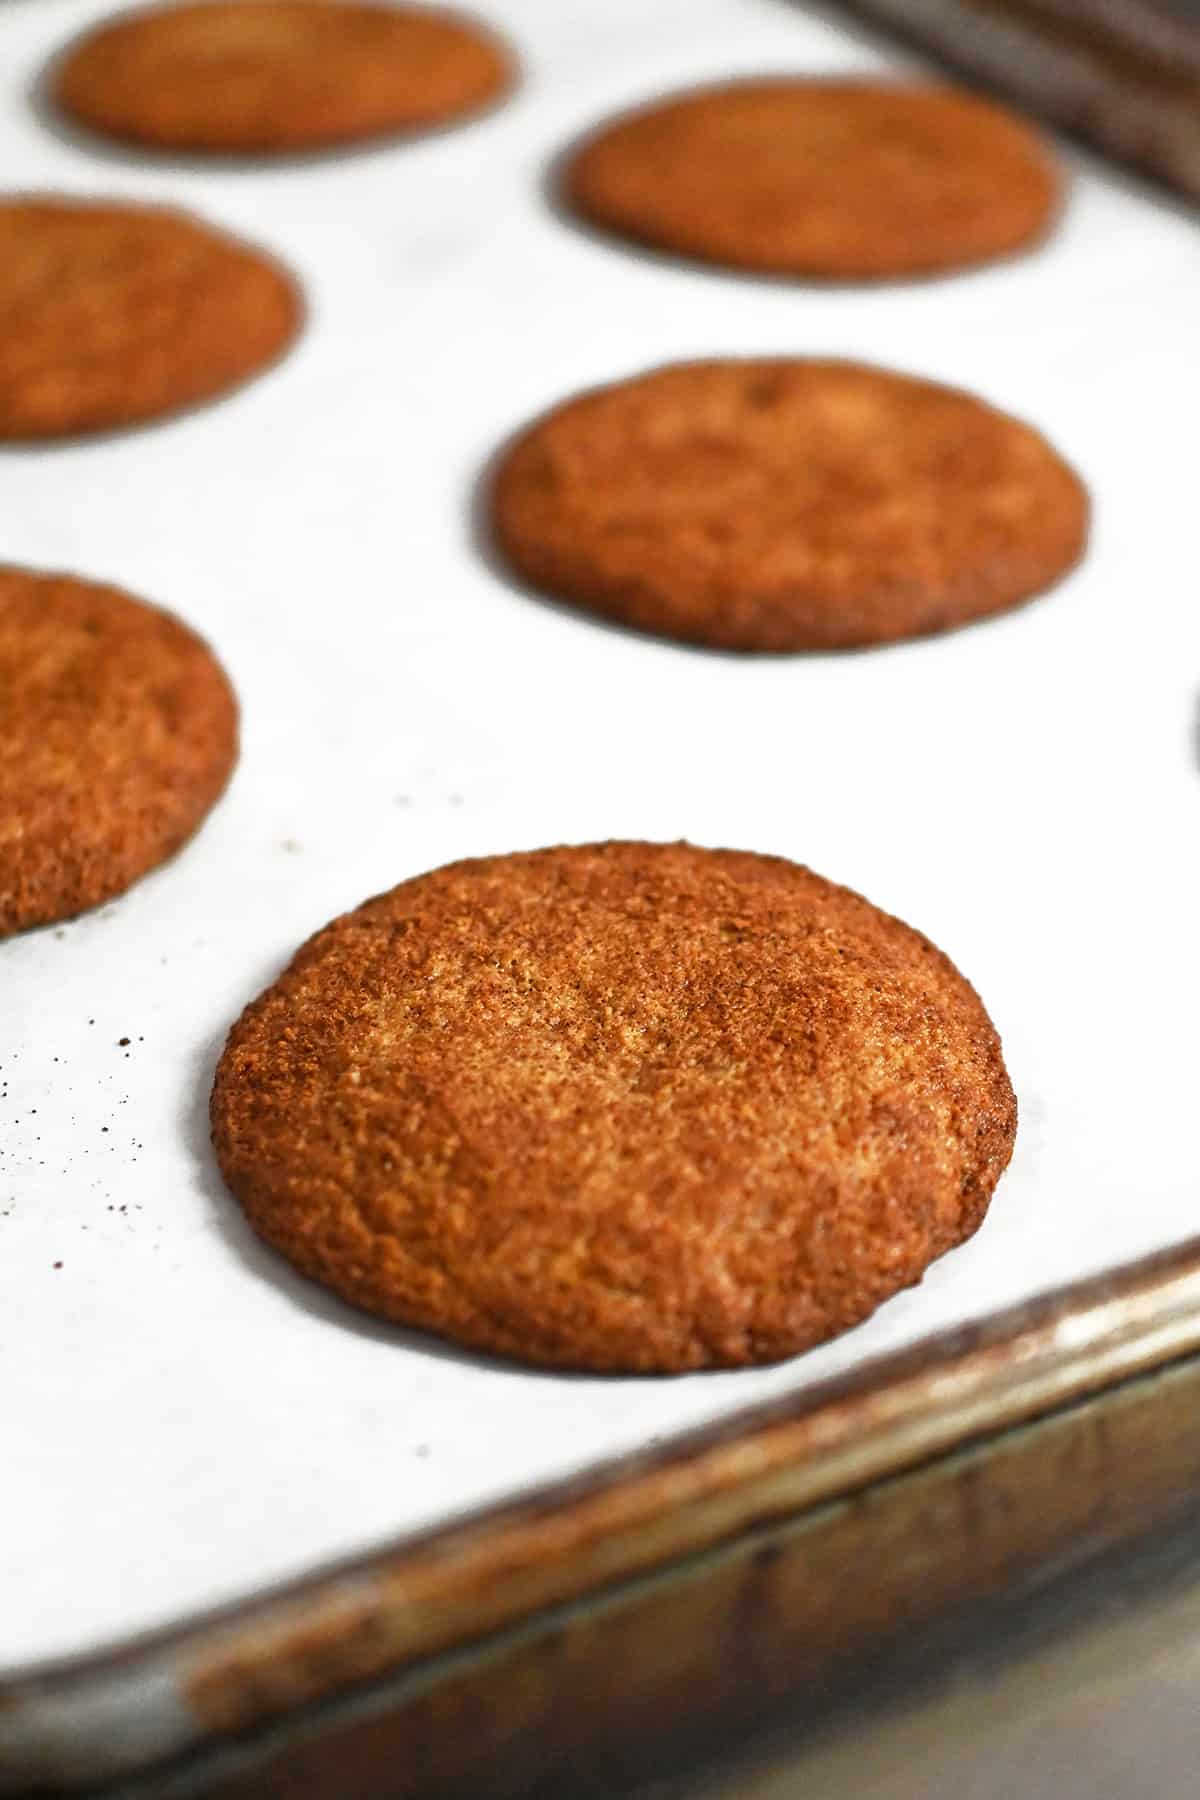 A close up of paleo and gluten free snickerdoodle cookies freshly baked on a rimmed baking sheet.